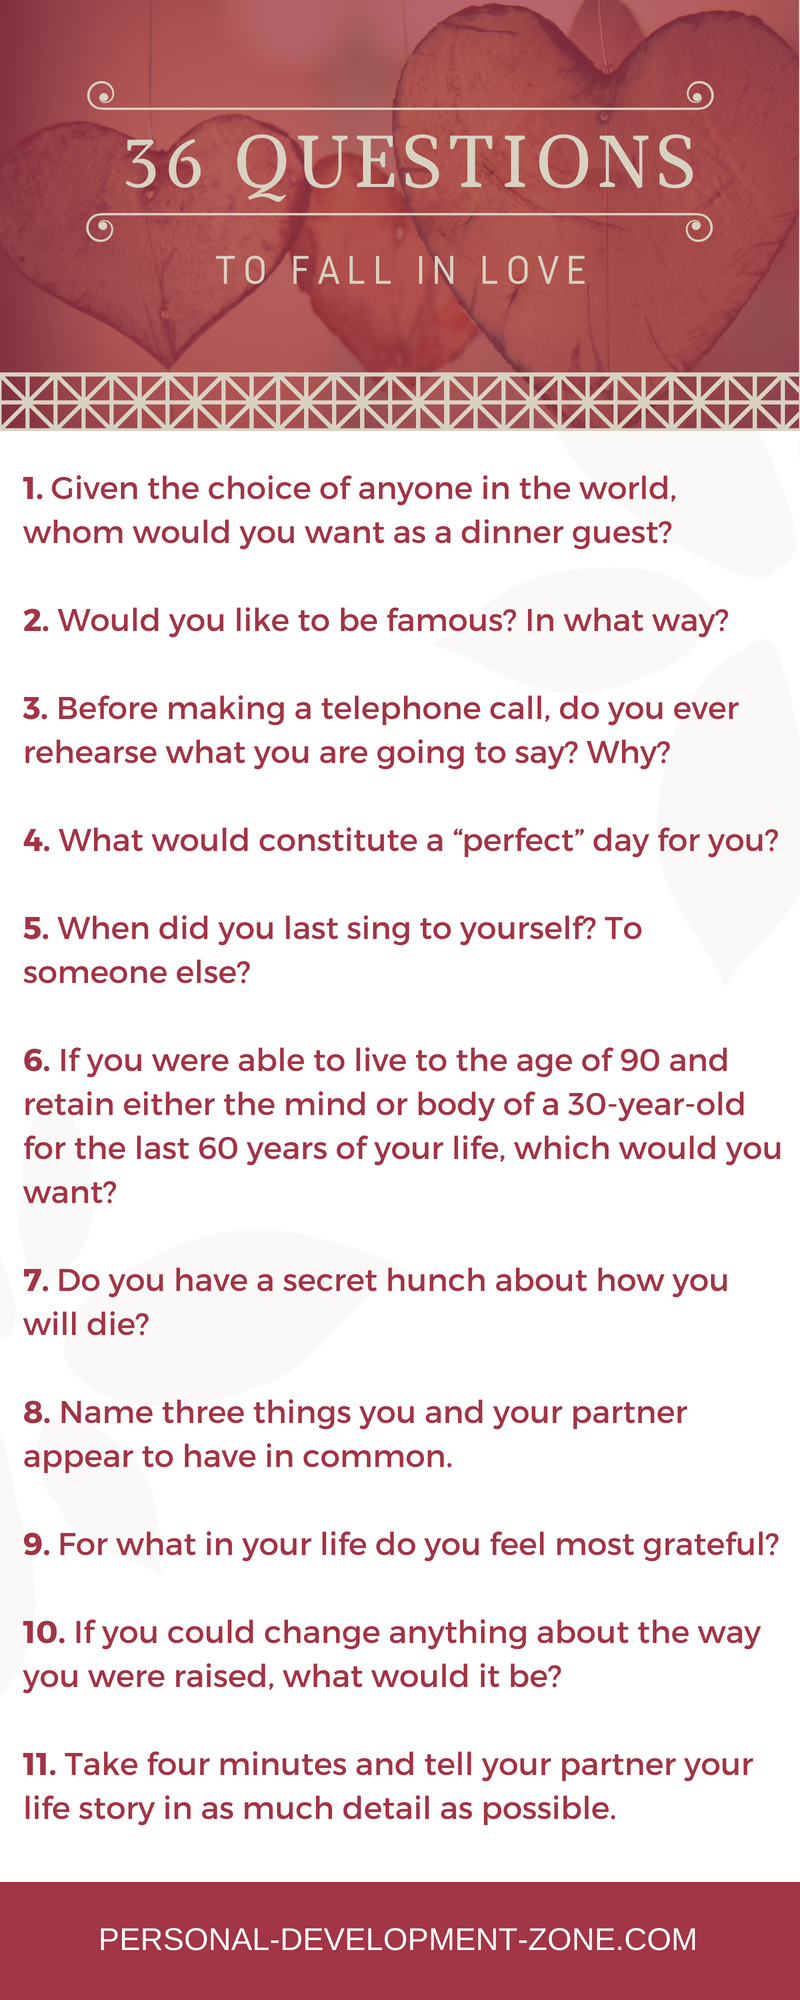 list of the 36 questions to fall in love